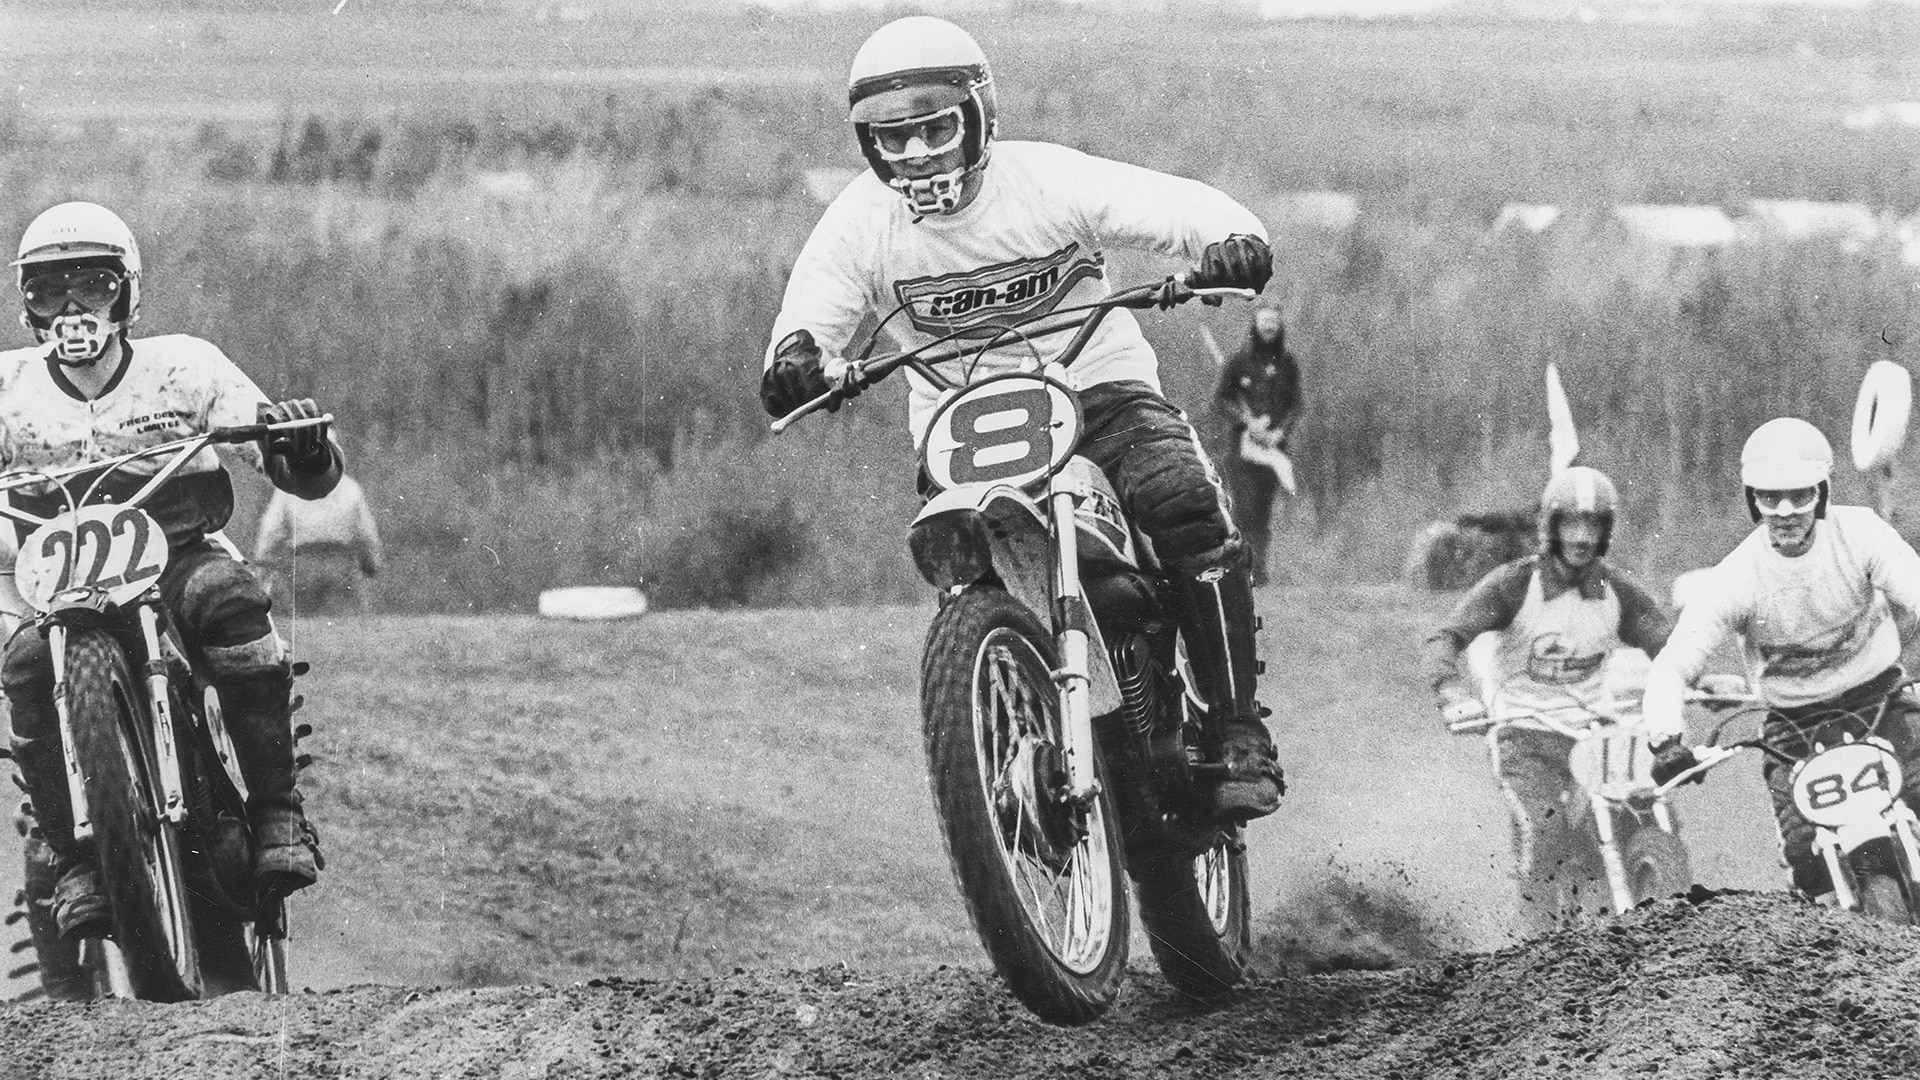 Riders racing their Can-Am motorcycles